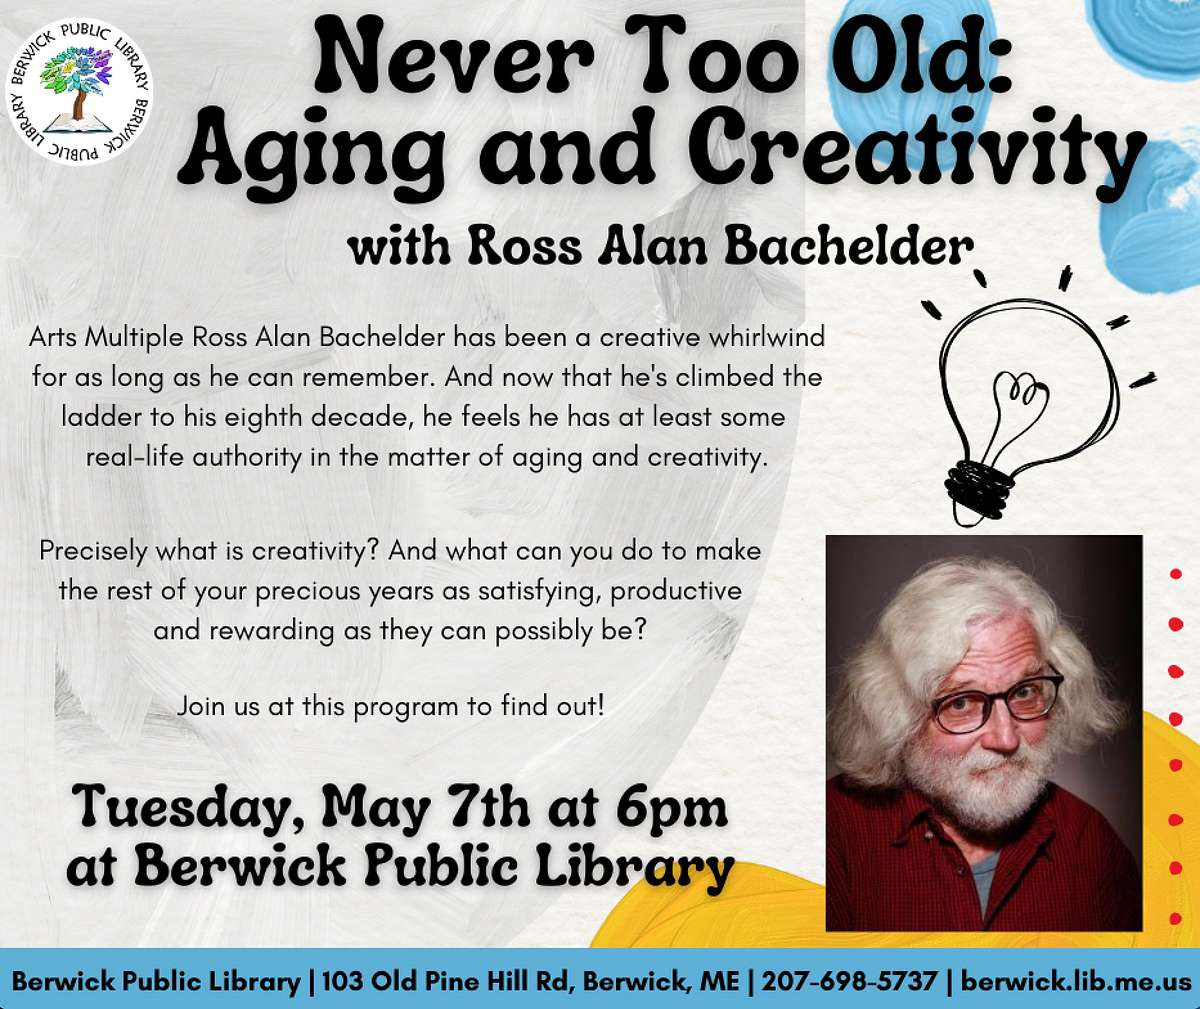 Never Too Old: Aging and Creativity!